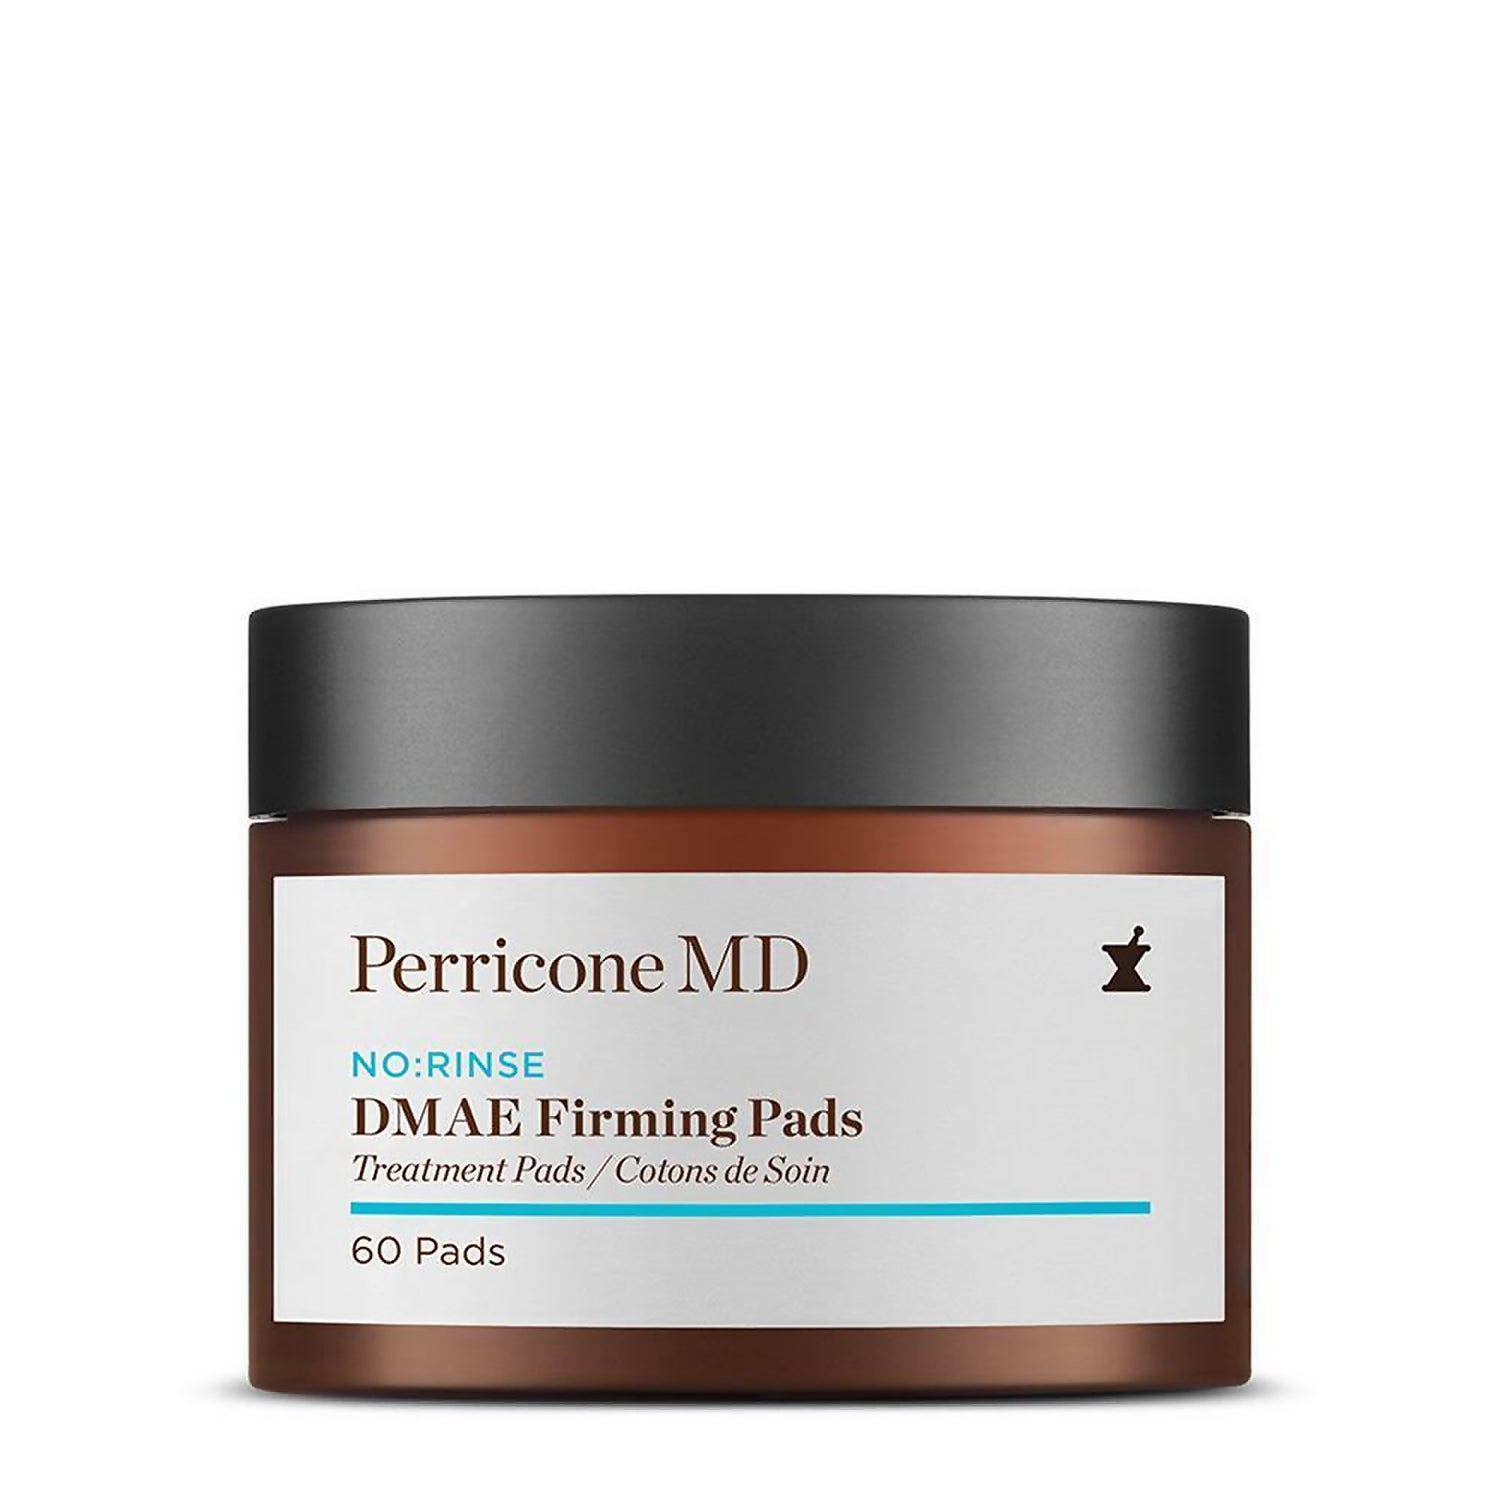 Perricone MD DMAE Firming Pads (60 count)